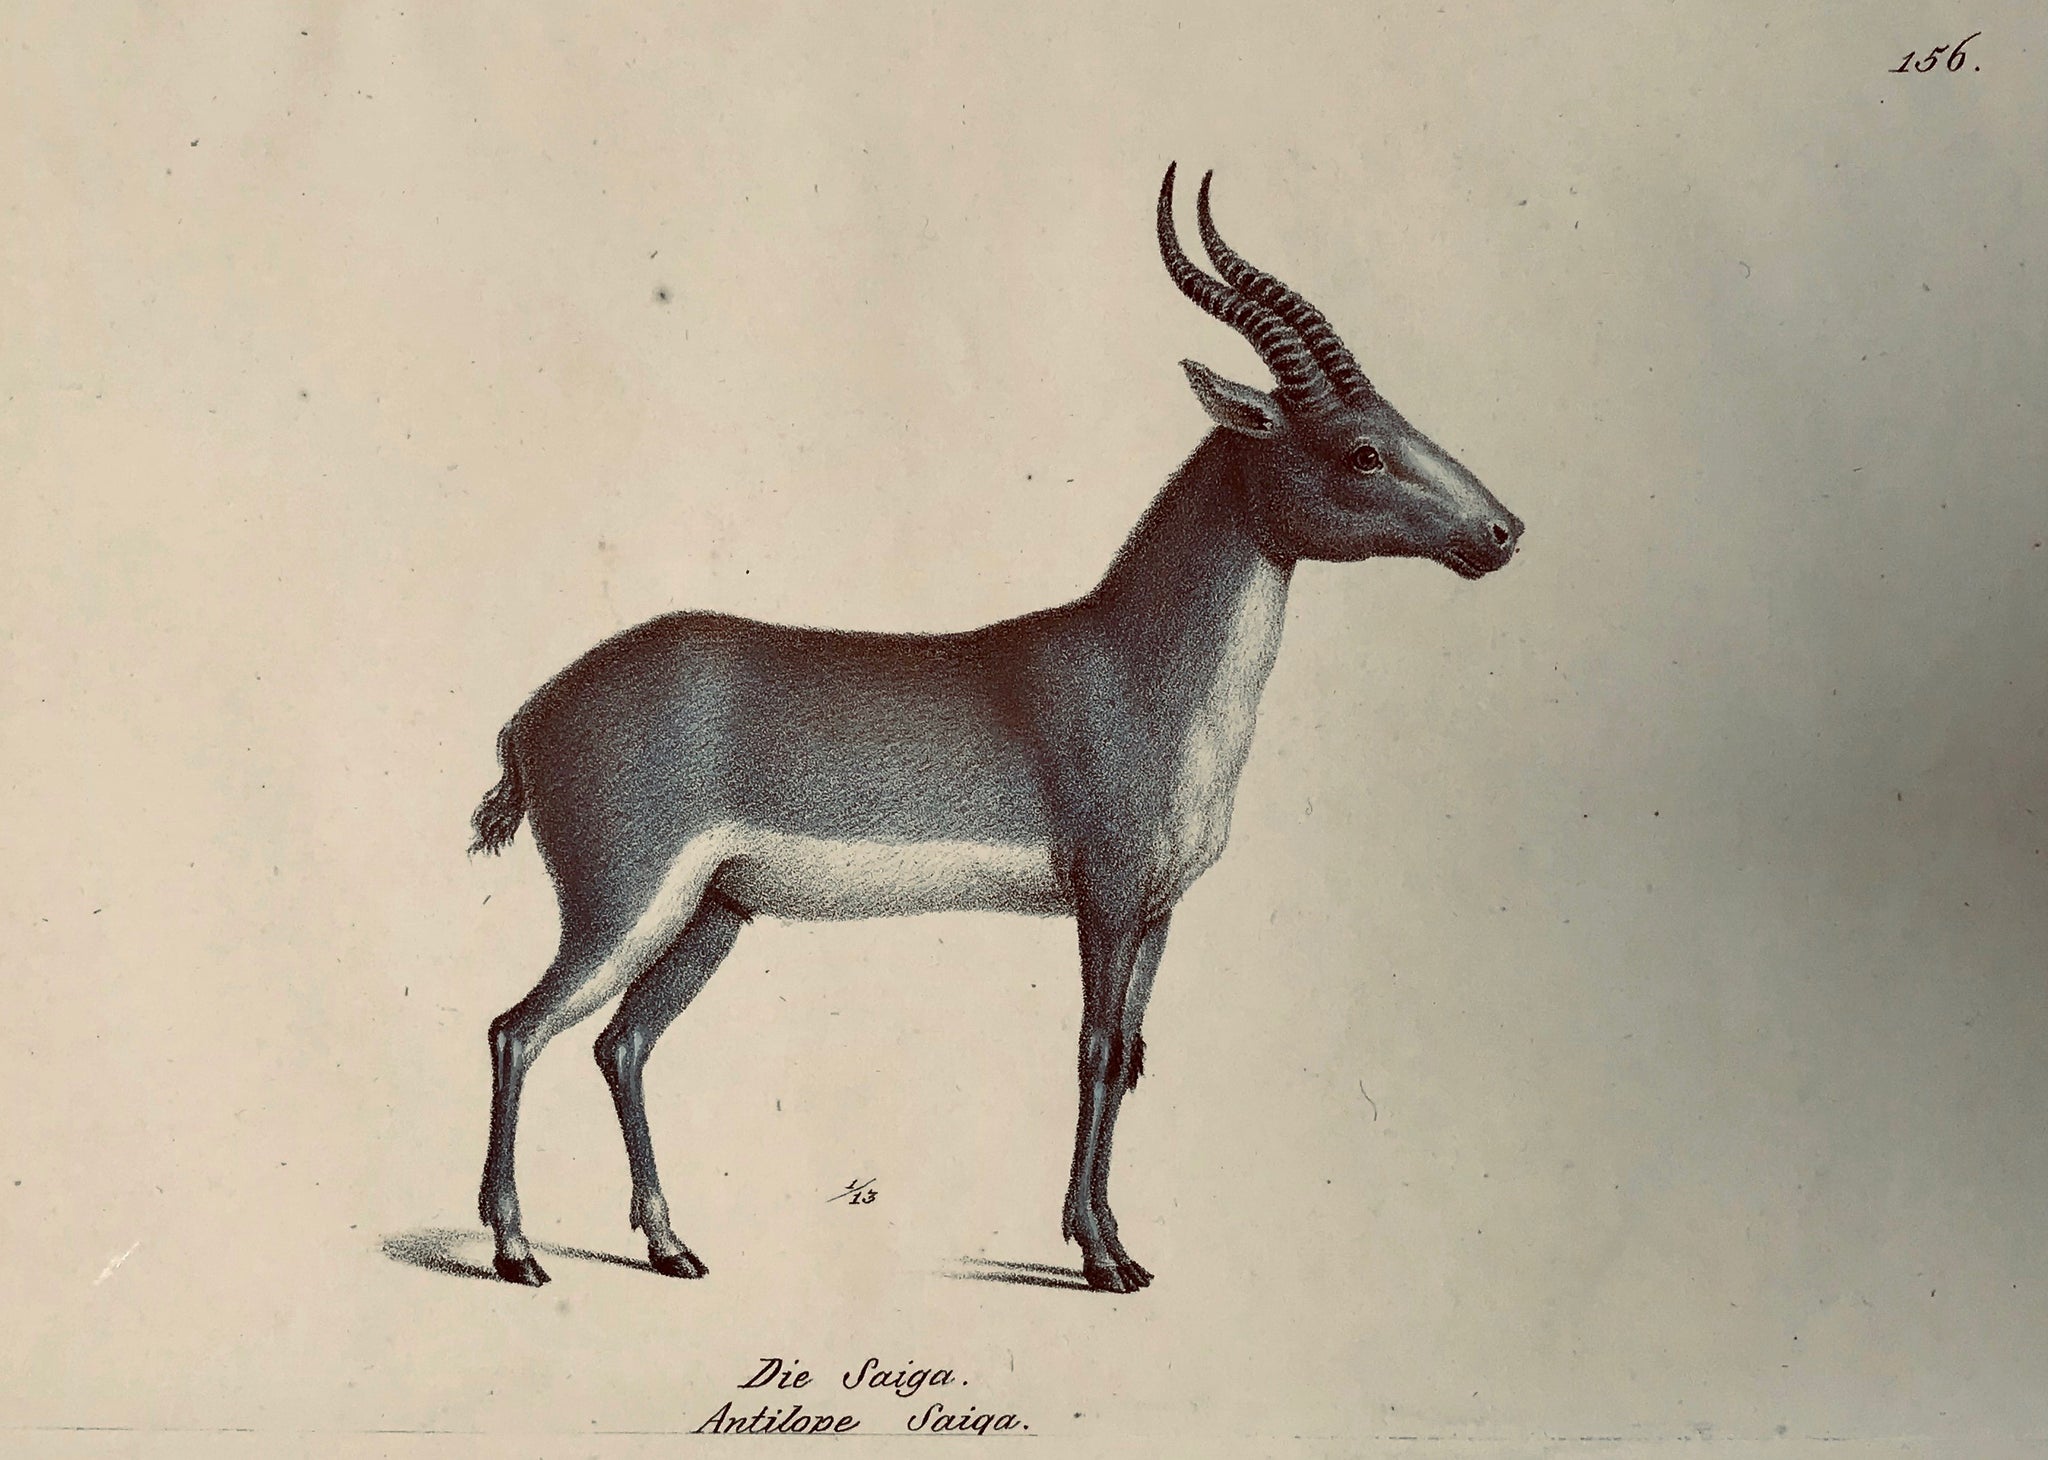 "Die Saiga" "Antiöope Saiga"  By H. Schinz.  This lithograph in original hand coloring was published 1827.